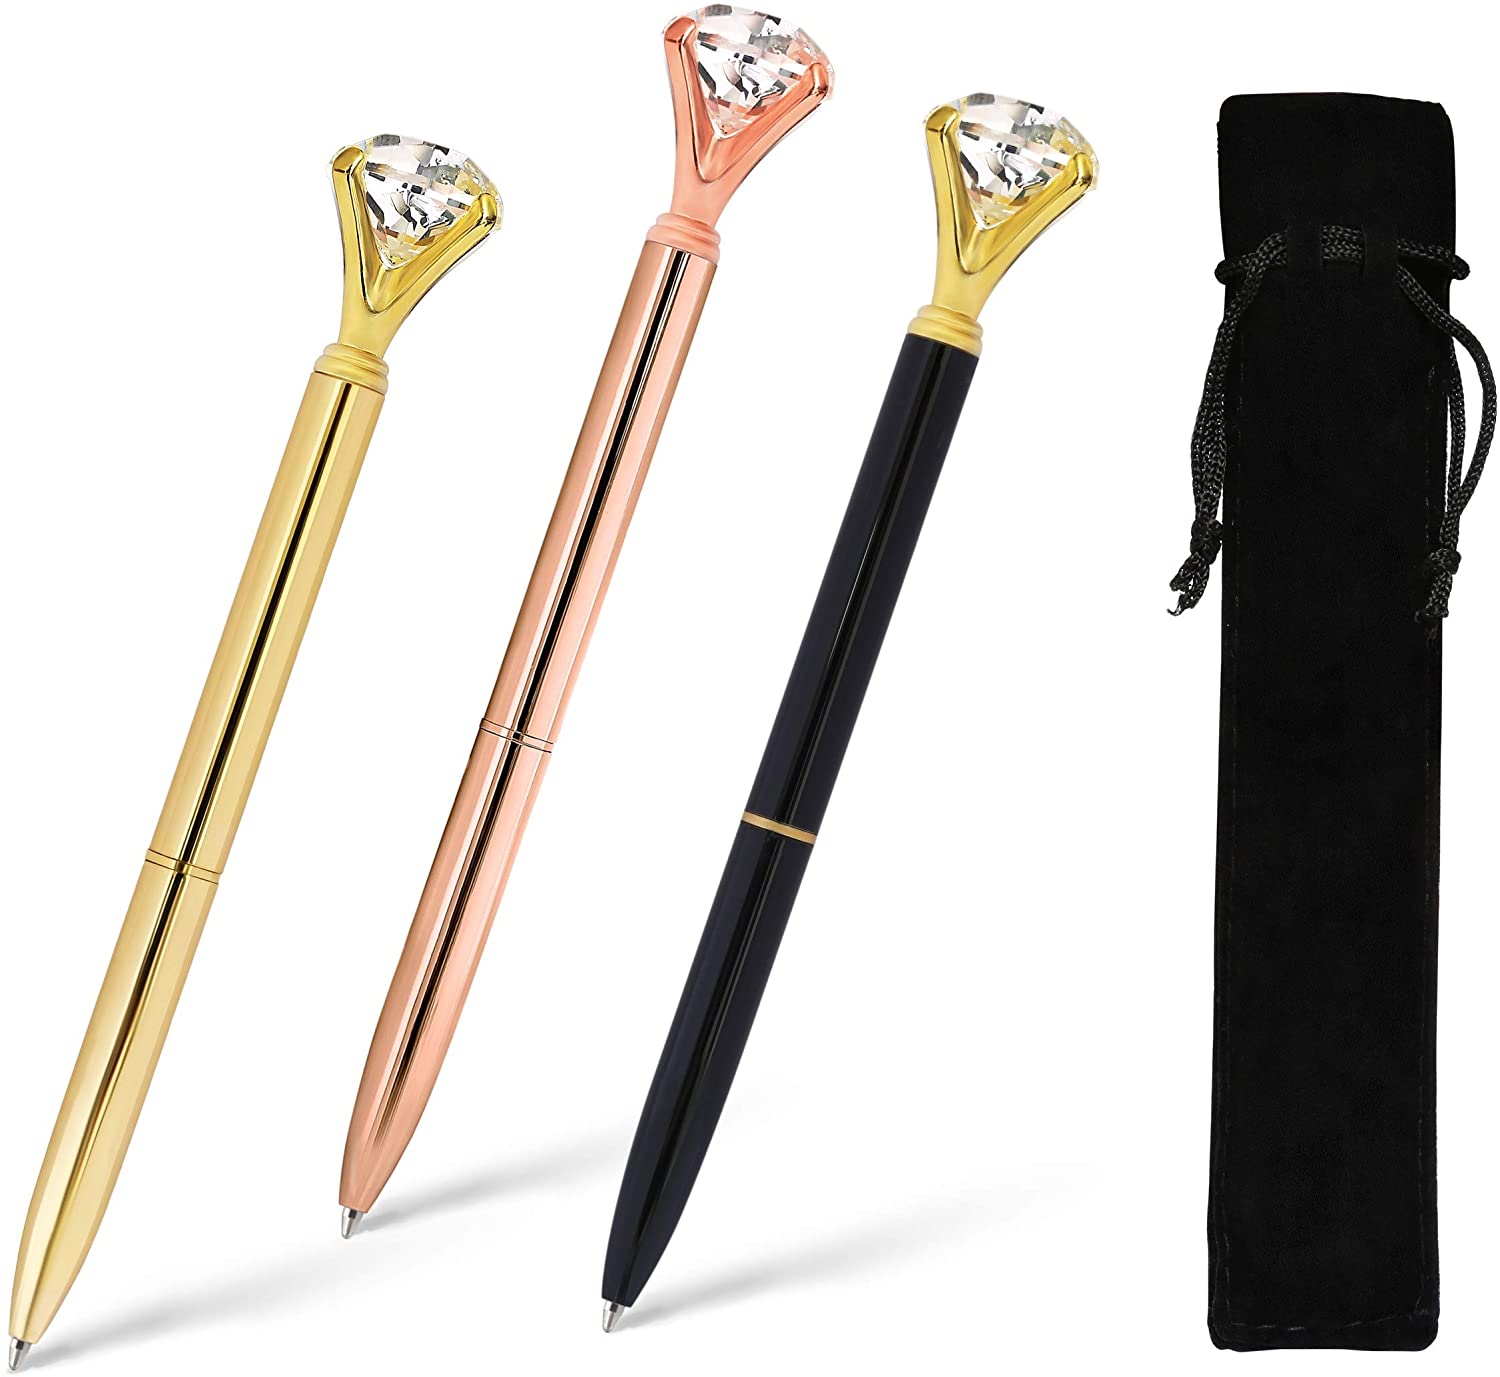 ETCBUYS Diamond Gold Metal Pens - Ballpoint Pens for Bridesmaids Gifts,  Gold Fan